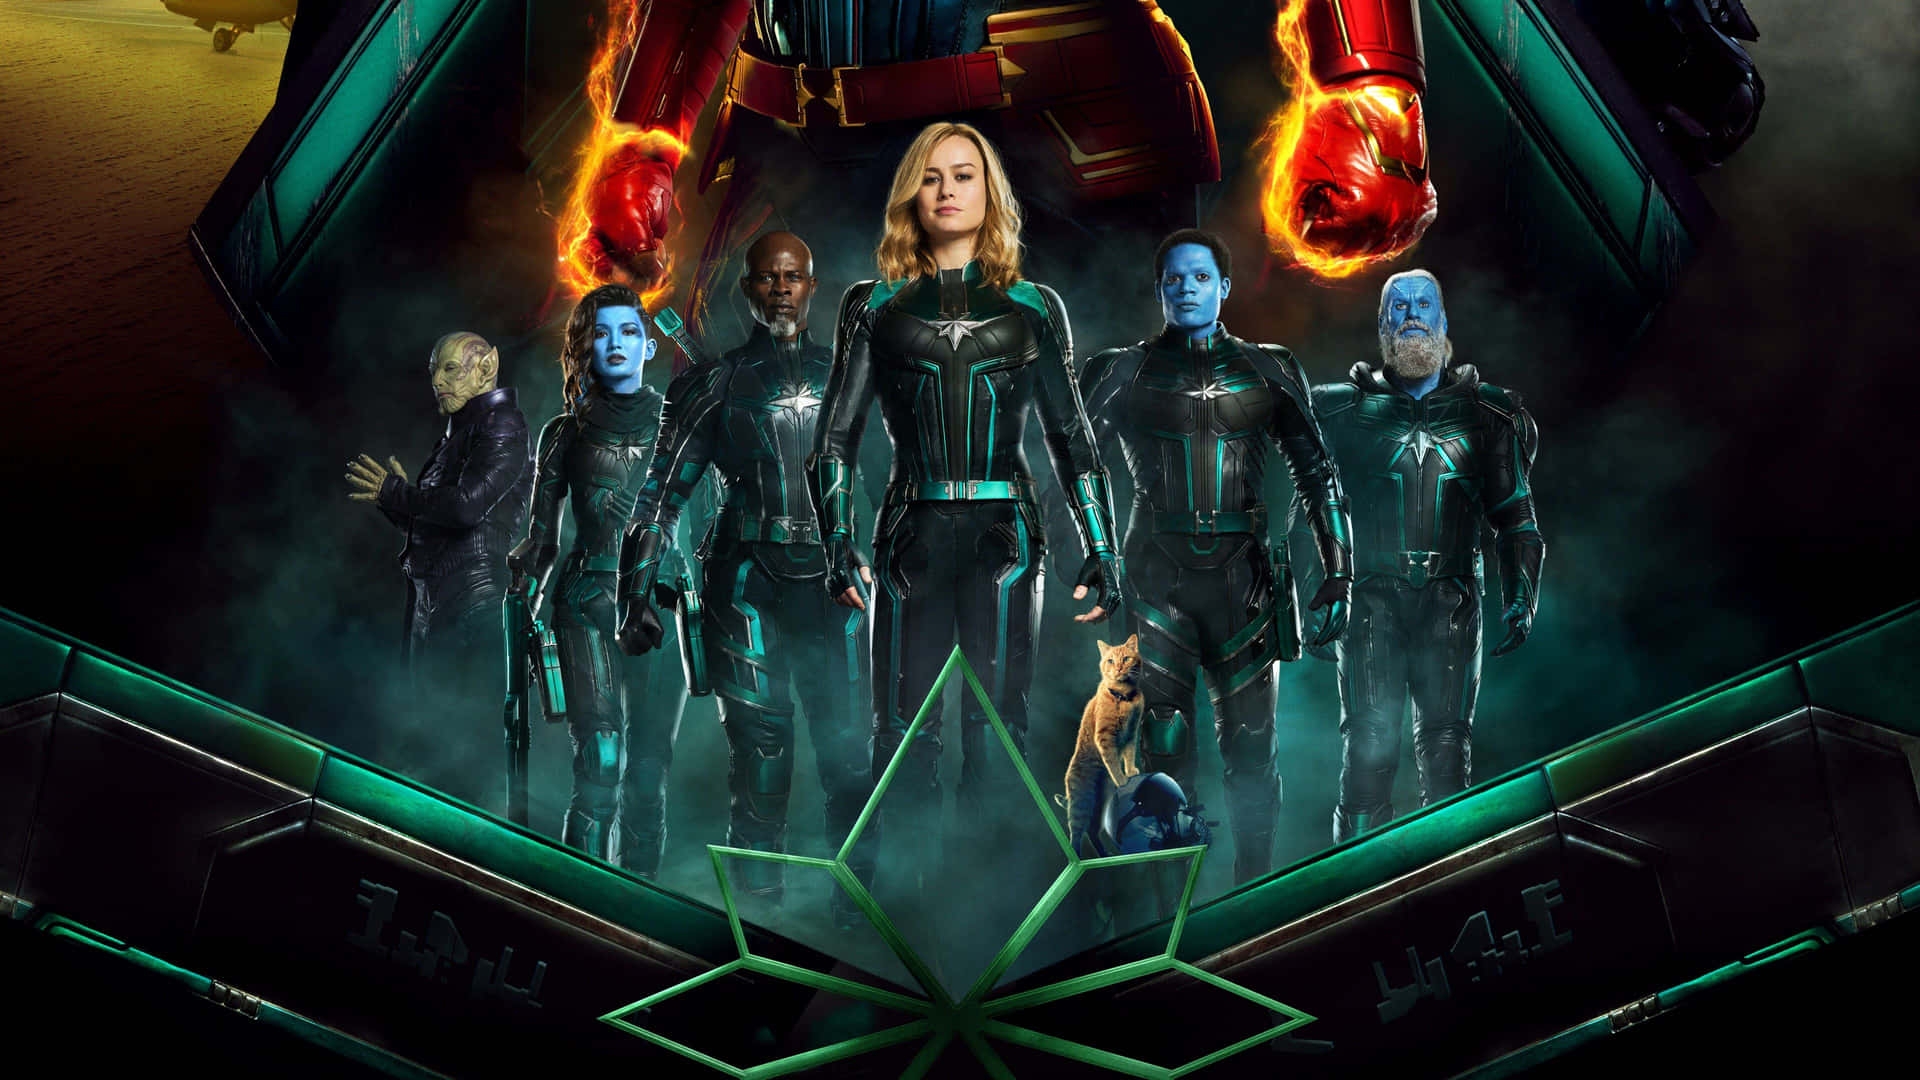 Brie Larson suited up as Captain Marvel in Marvel's movie Wallpaper